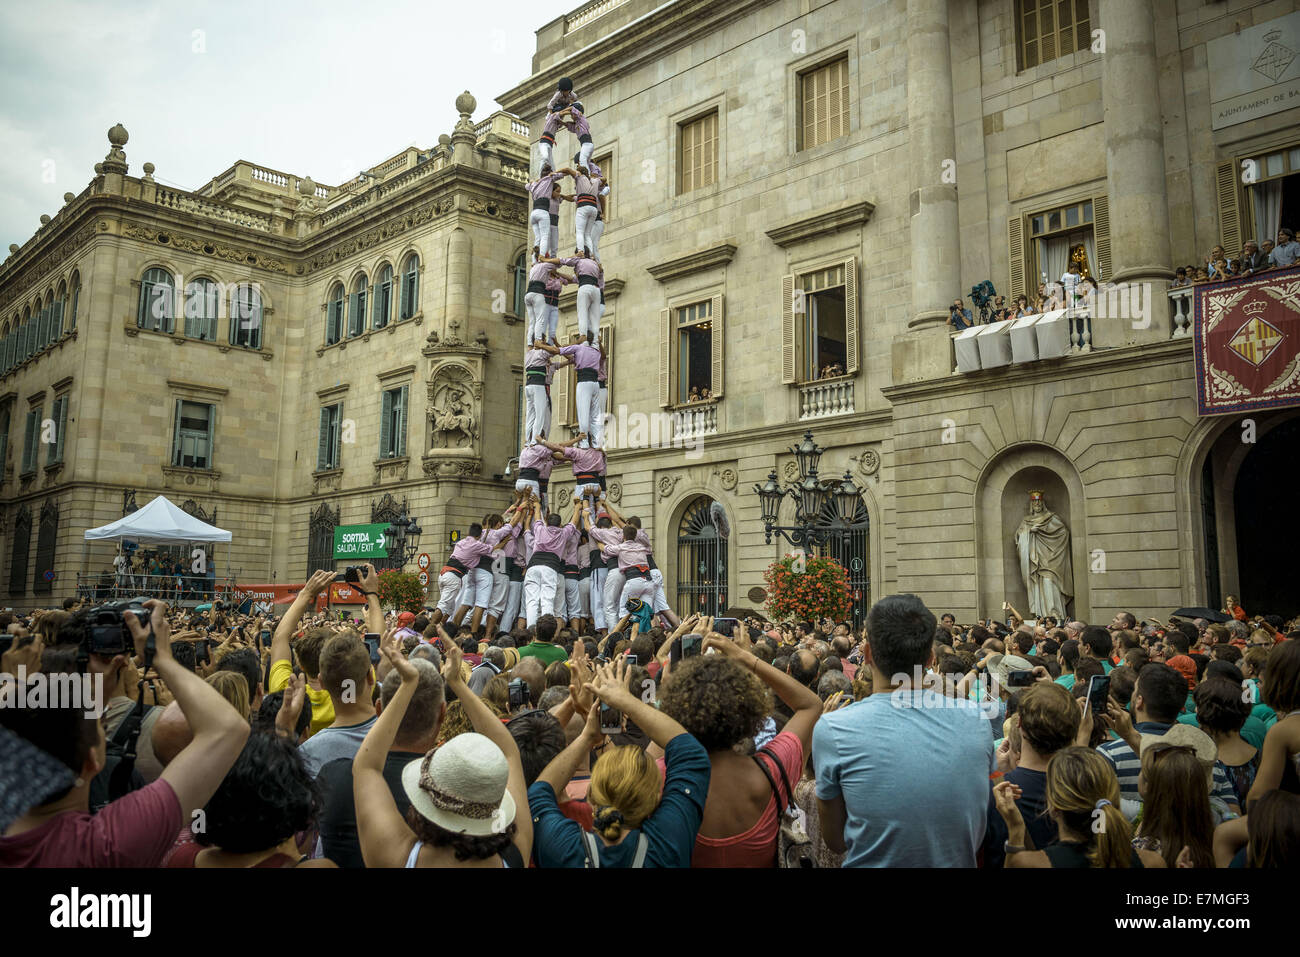 Barcelona, Spain. 21st Sept 2014. The 'Minyons de Terrassa' build a human tower during the city festival 'La Merce 2014' in front of the town hall of Barcelona. - Thousands of spectators filled Barcelona's St Jaume place in front of the town hall to follow the first day of castellers (Human towers) from Vilafranca, Terrassa and Barcelona, as part of the traditional program of the city festival, La Merce 2014. Credit:  Matthias Oesterle/ZUMA Wire/ZUMAPRESS.com/Alamy Live News Stock Photo